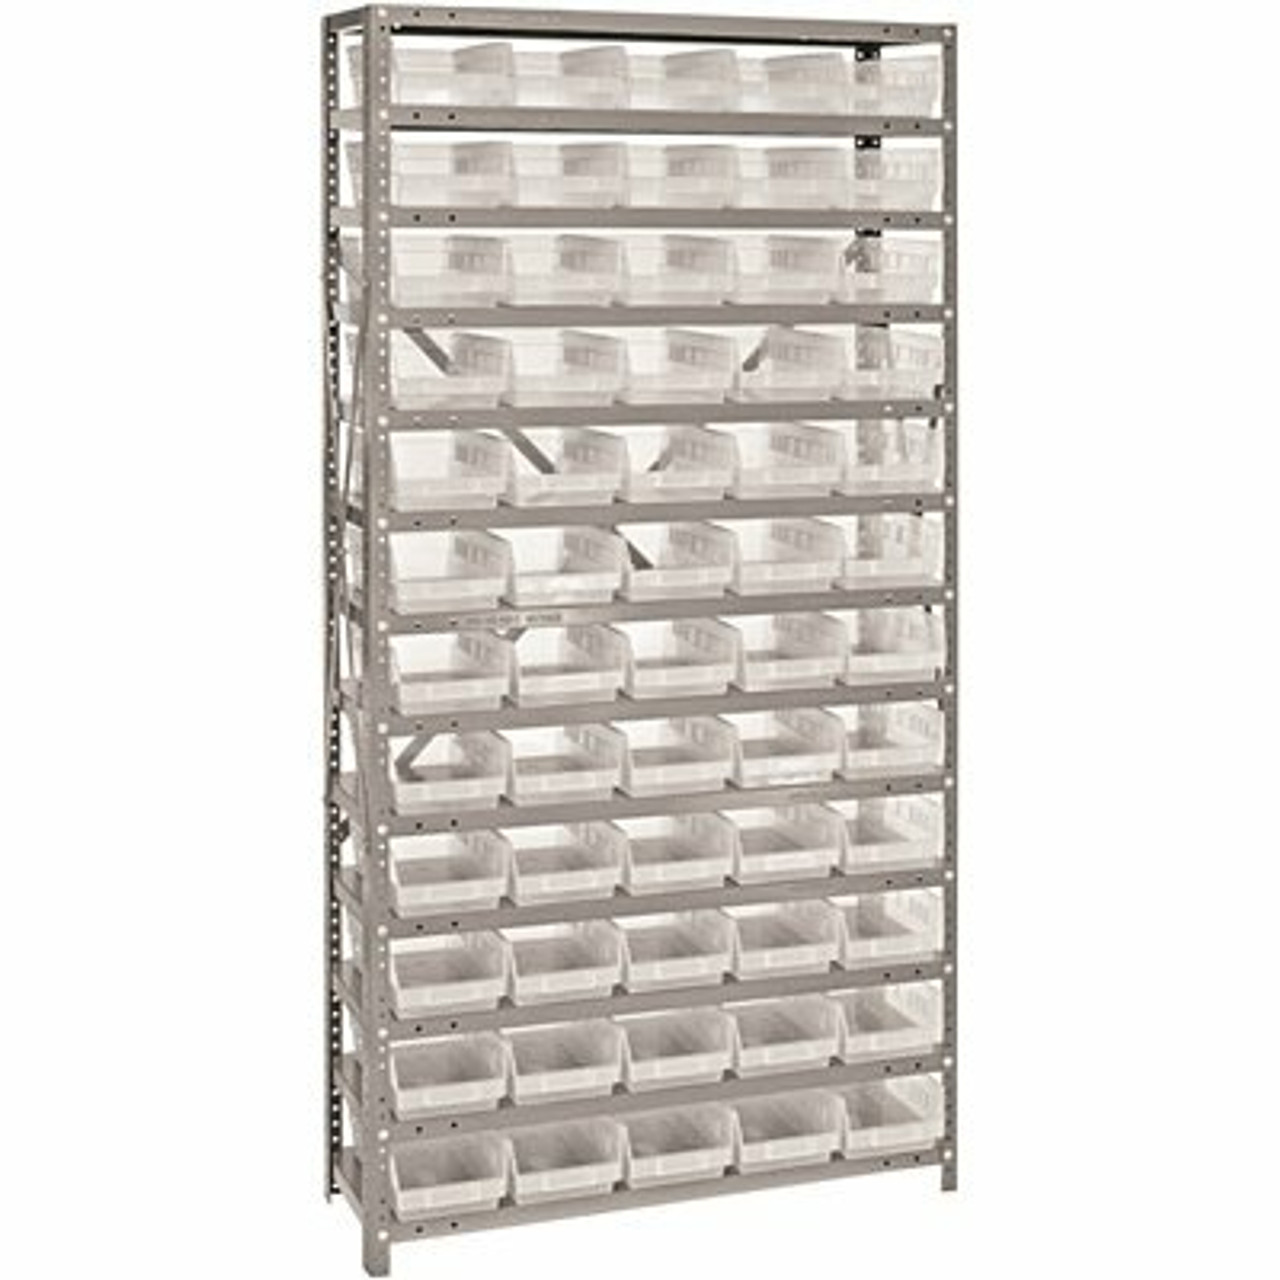 1275-101Cl Economy 4 In. Shelf Bin 12 In. X 36 In. X 75 In. 13-Tier Shelving System Complete With Qsb102 Clear Bins